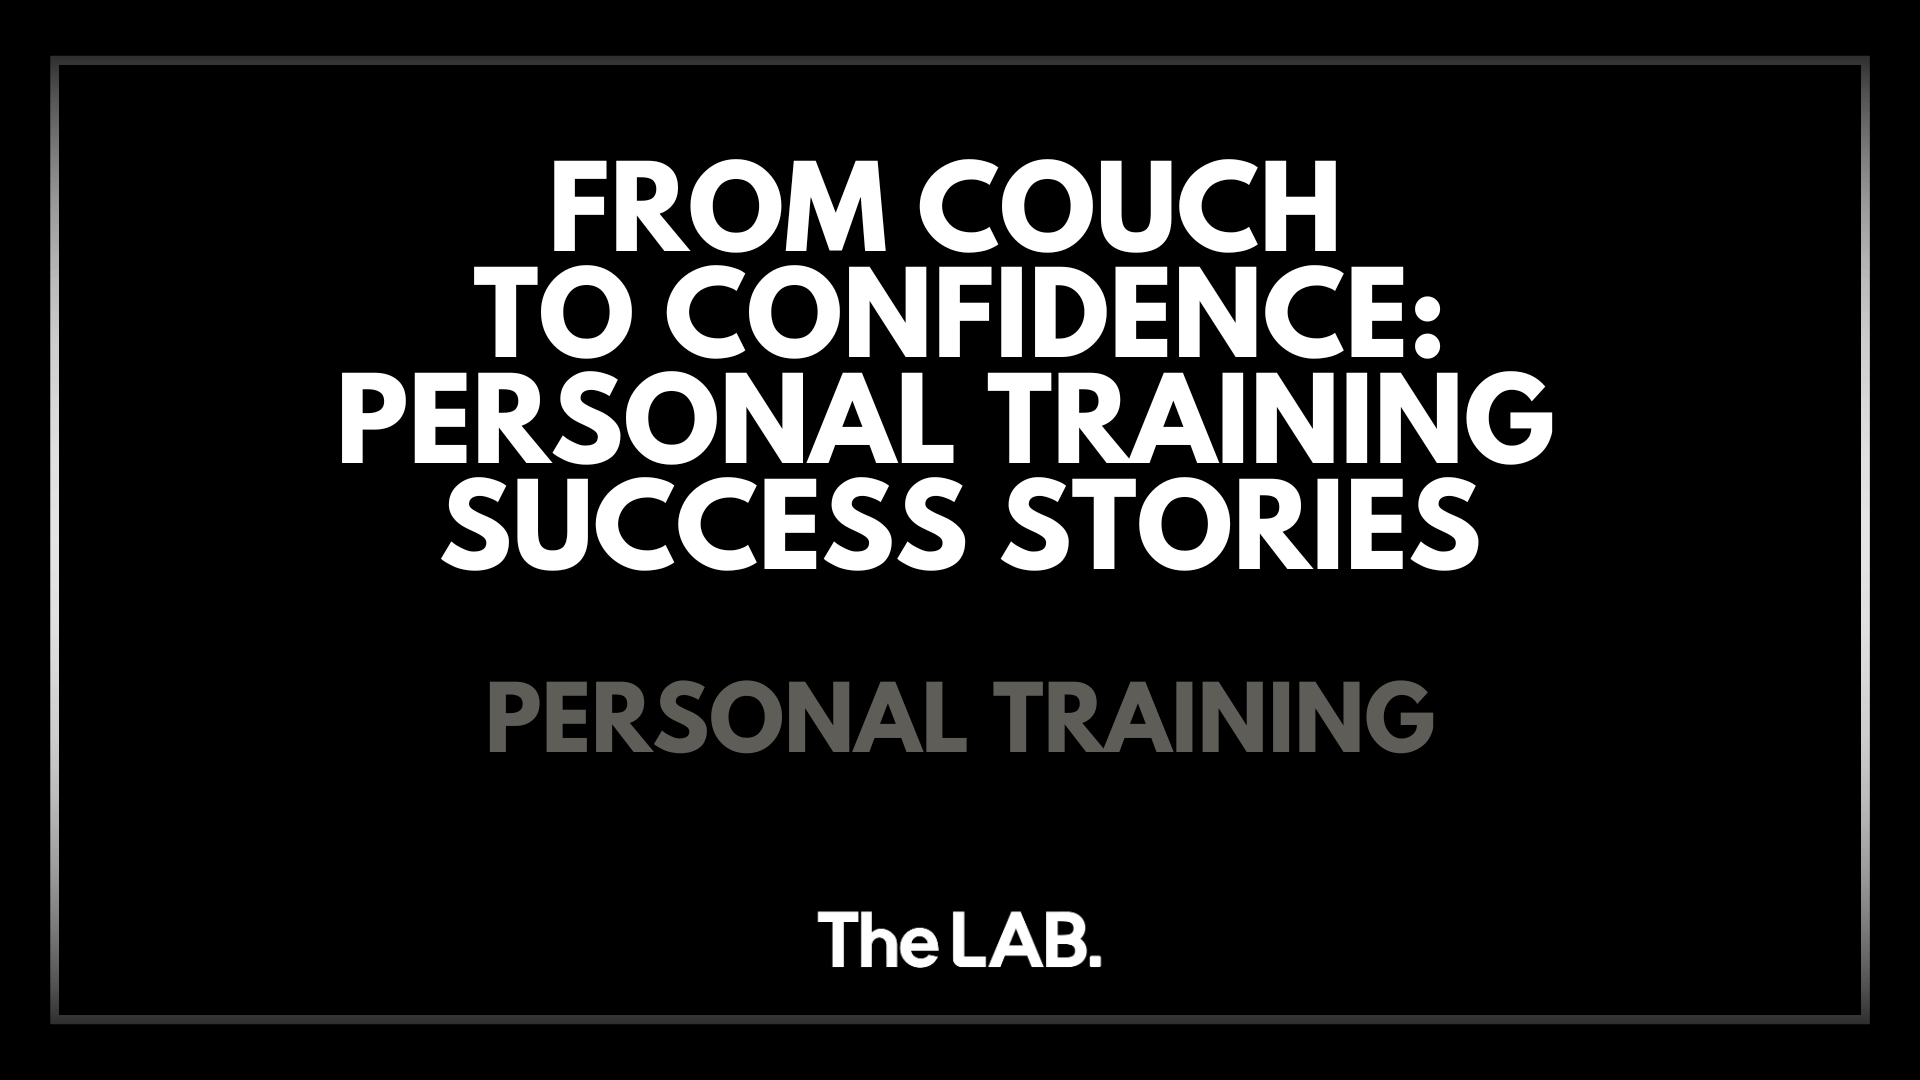 From Couch to Confidence: Personal Training Success Stories